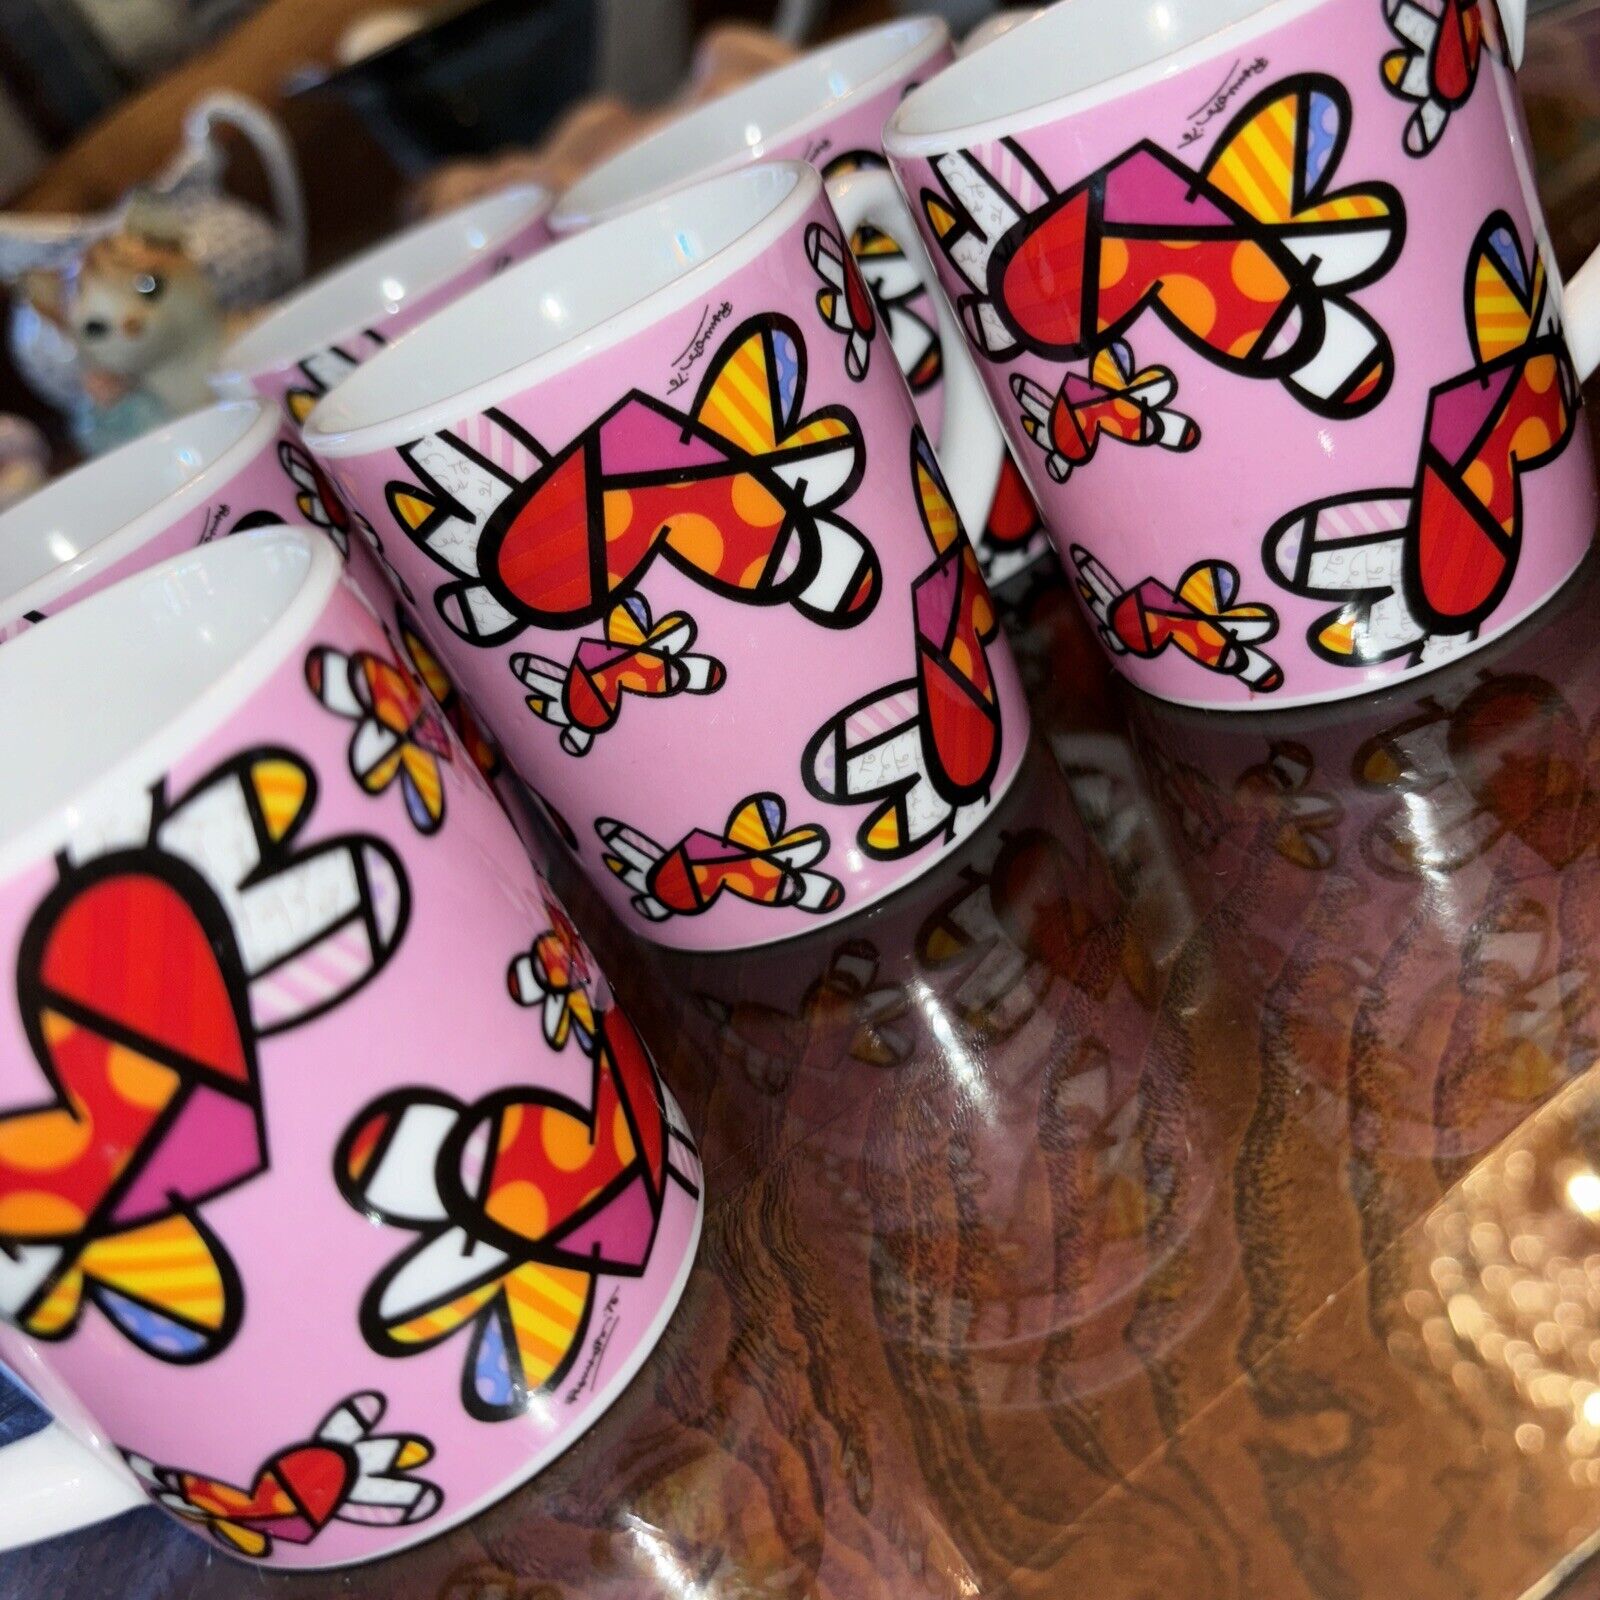 2 1/2”x 2 1/4 Coffee Cup Demitasse Set Of 6 Rare Britto HeartArt Design By Home